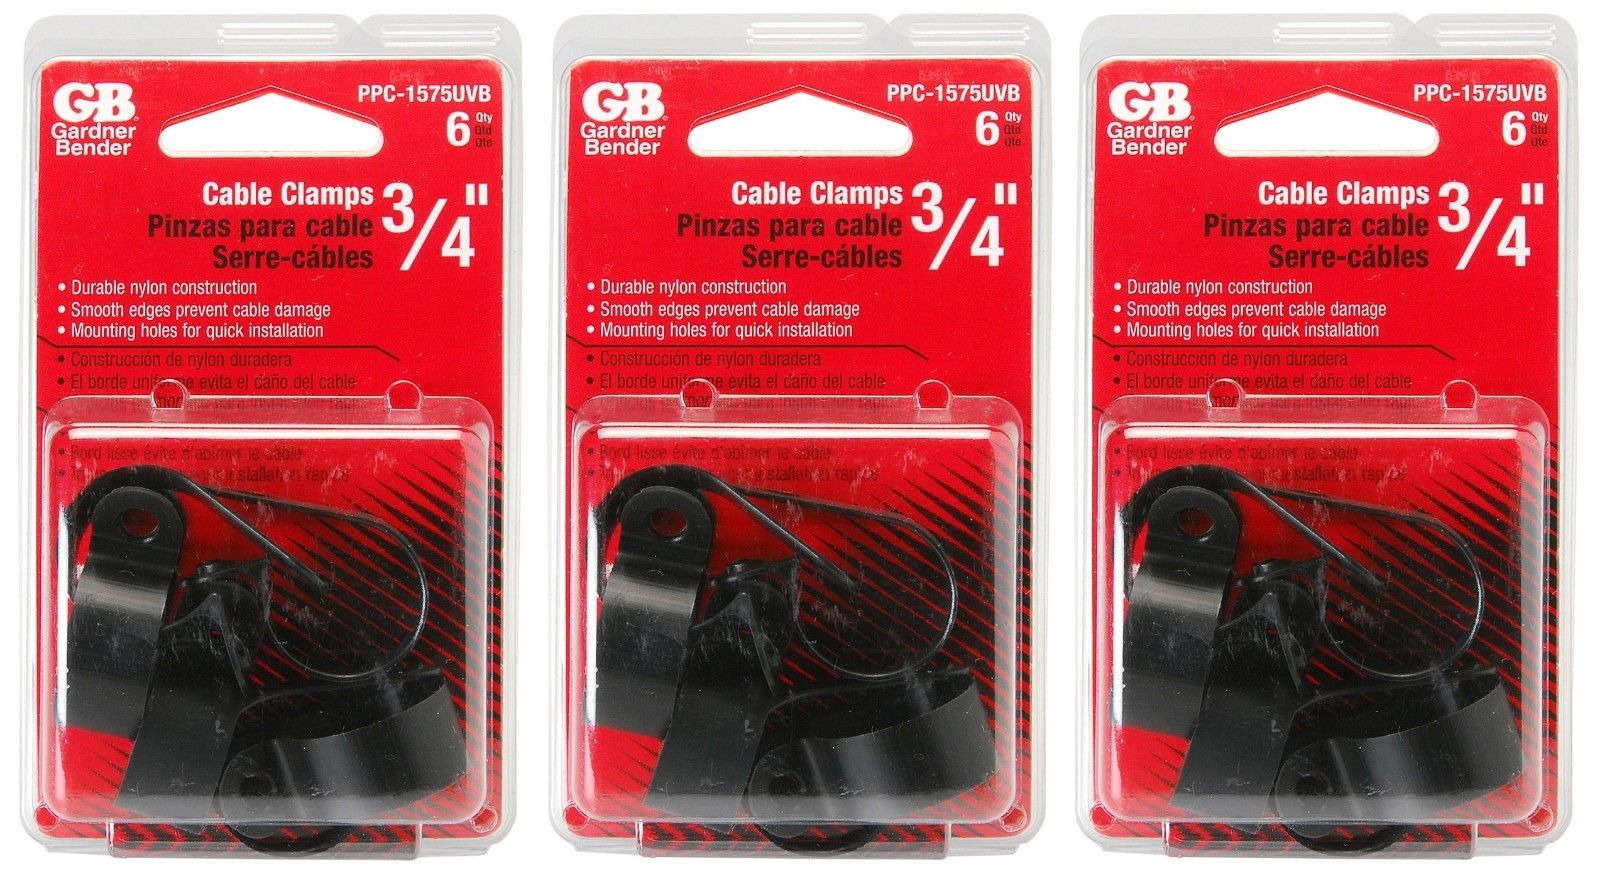 Gardner Bender PPC-1575UVB 3/4" Cable Clamps 3 Packs of 6 (18 Clamps) USA